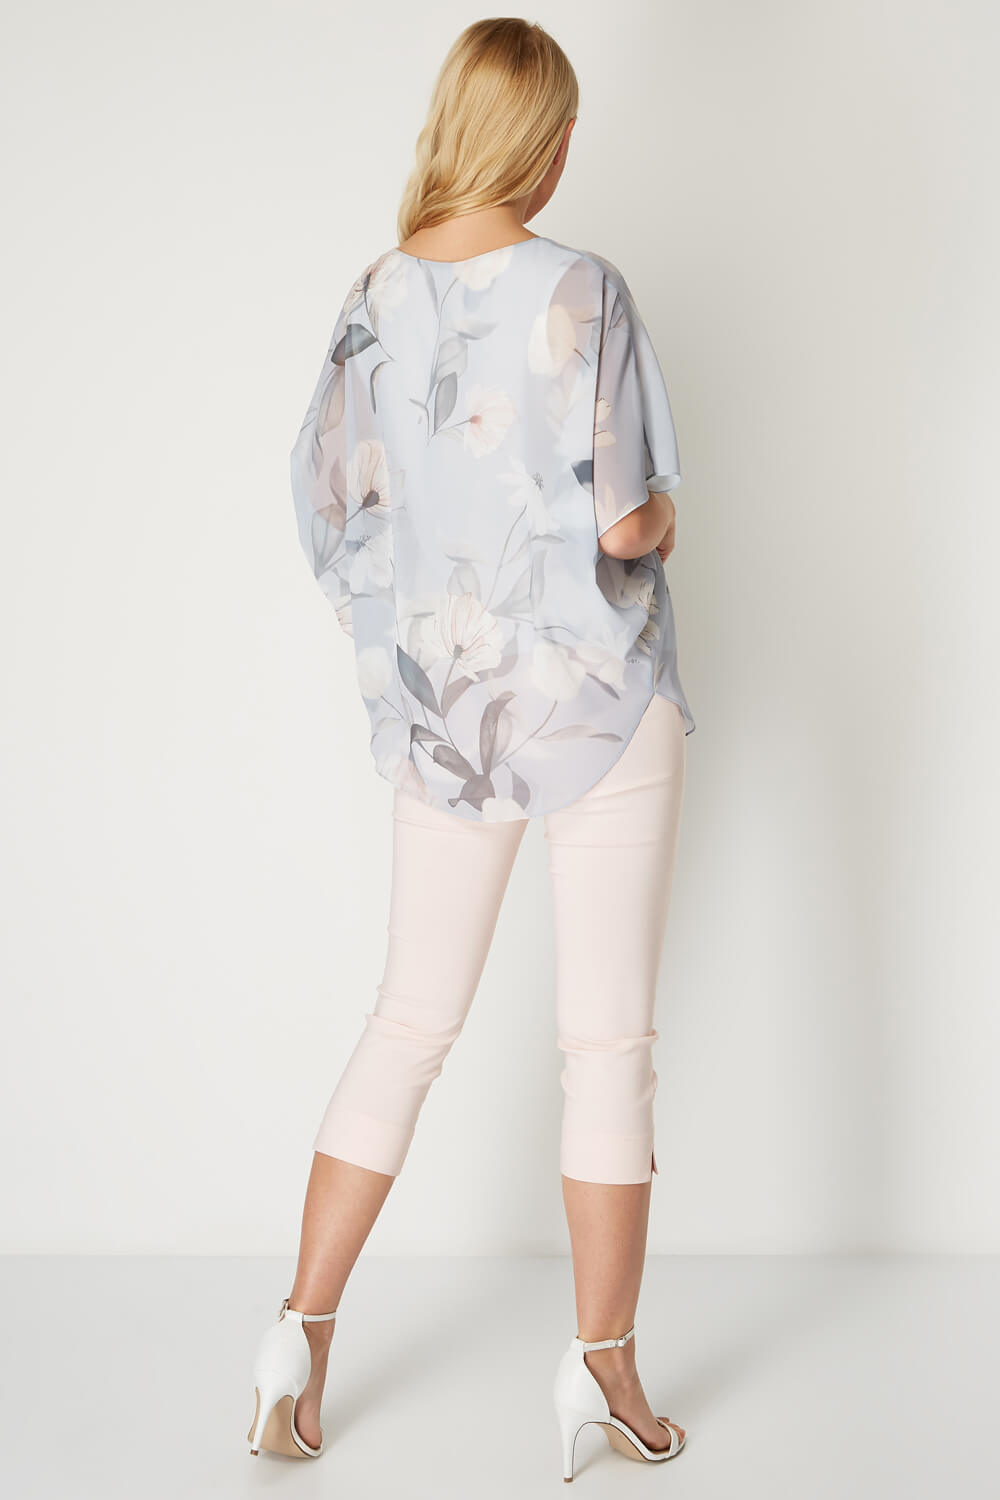 Light Grey Batwing Floral Top , Image 4 of 9